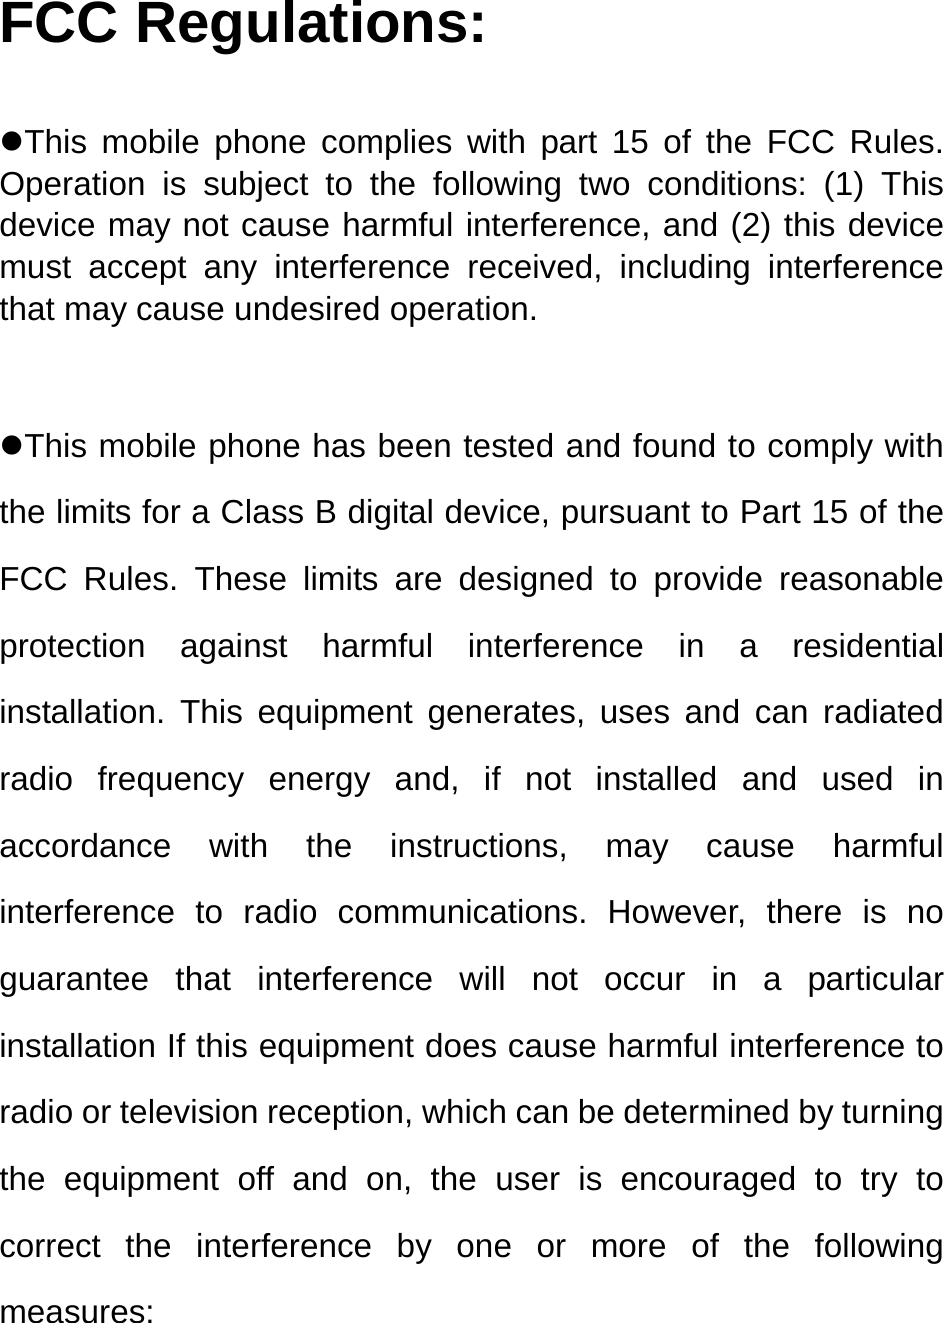   FCC Regulations:  zThis mobile phone complies with part 15 of the FCC Rules. Operation is subject to the following two conditions: (1) This device may not cause harmful interference, and (2) this device must accept any interference received, including interference that may cause undesired operation.  zThis mobile phone has been tested and found to comply with the limits for a Class B digital device, pursuant to Part 15 of the FCC Rules. These limits are designed to provide reasonable protection against harmful interference in a residential installation. This equipment generates, uses and can radiated radio frequency energy and, if not installed and used in accordance with the instructions, may cause harmful interference to radio communications. However, there is no guarantee that interference will not occur in a particular installation If this equipment does cause harmful interference to radio or television reception, which can be determined by turning the equipment off and on, the user is encouraged to try to correct the interference by one or more of the following measures: 